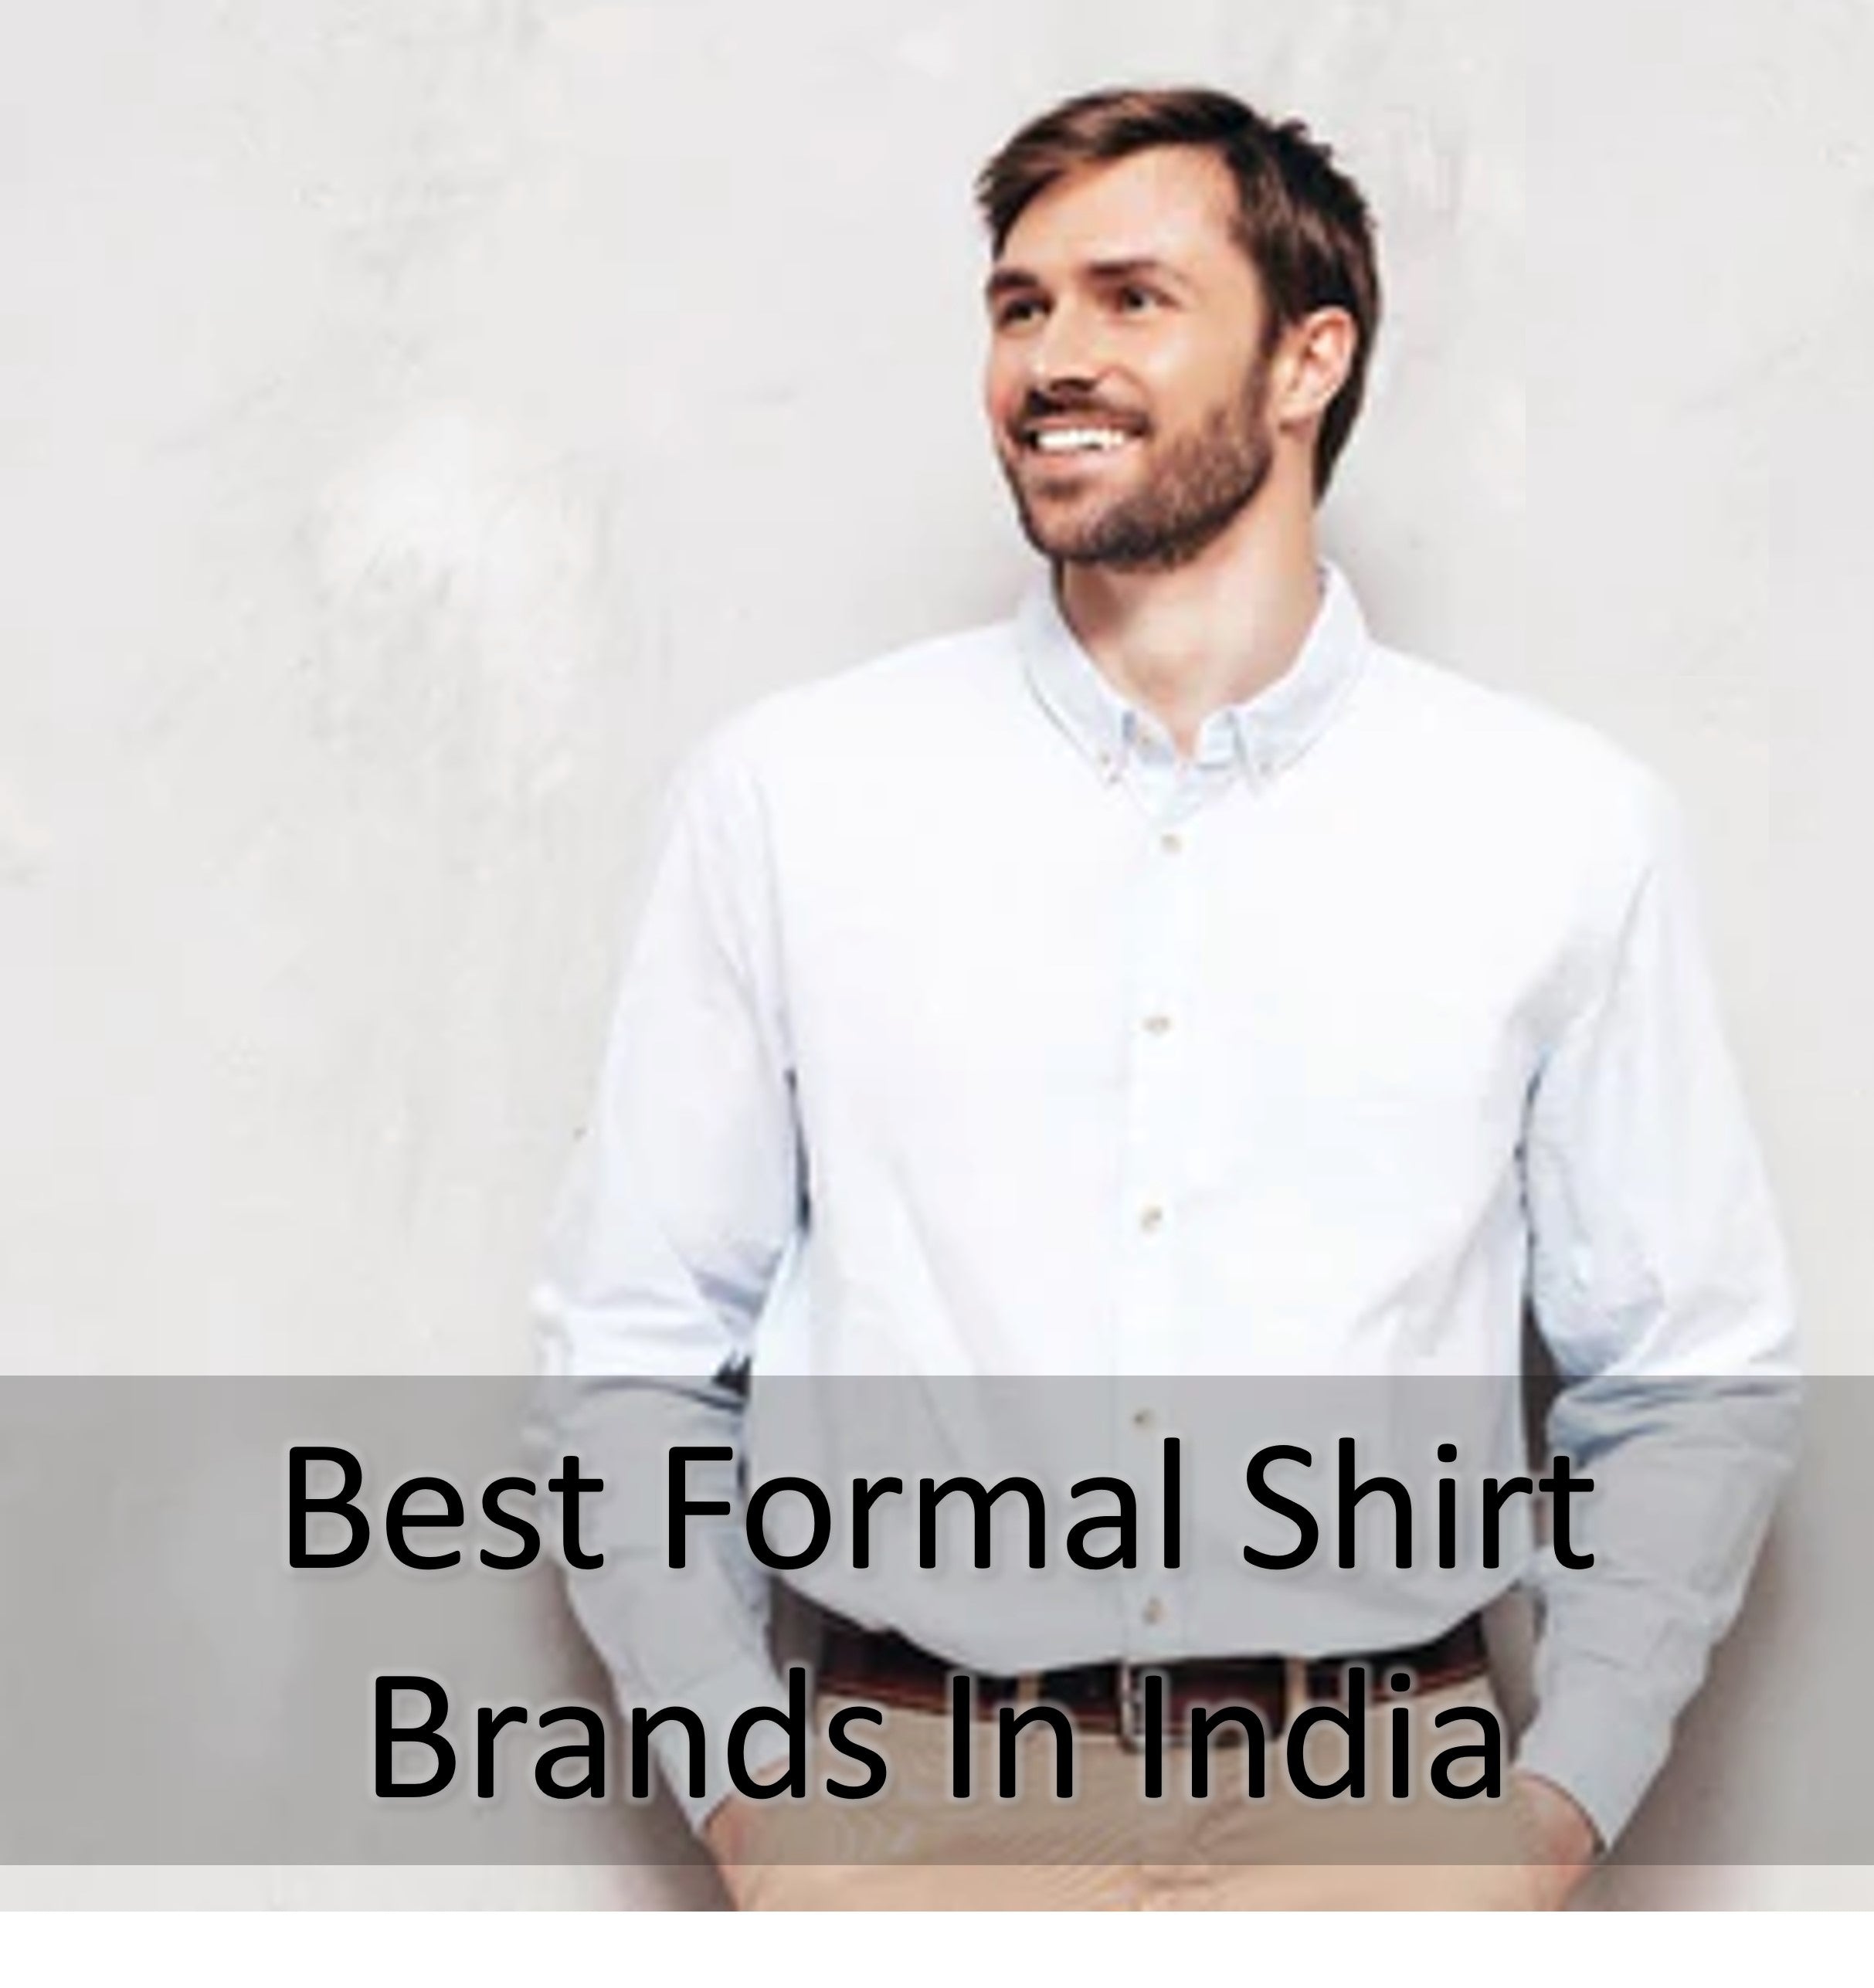 Best Formal Shirt Brands in India